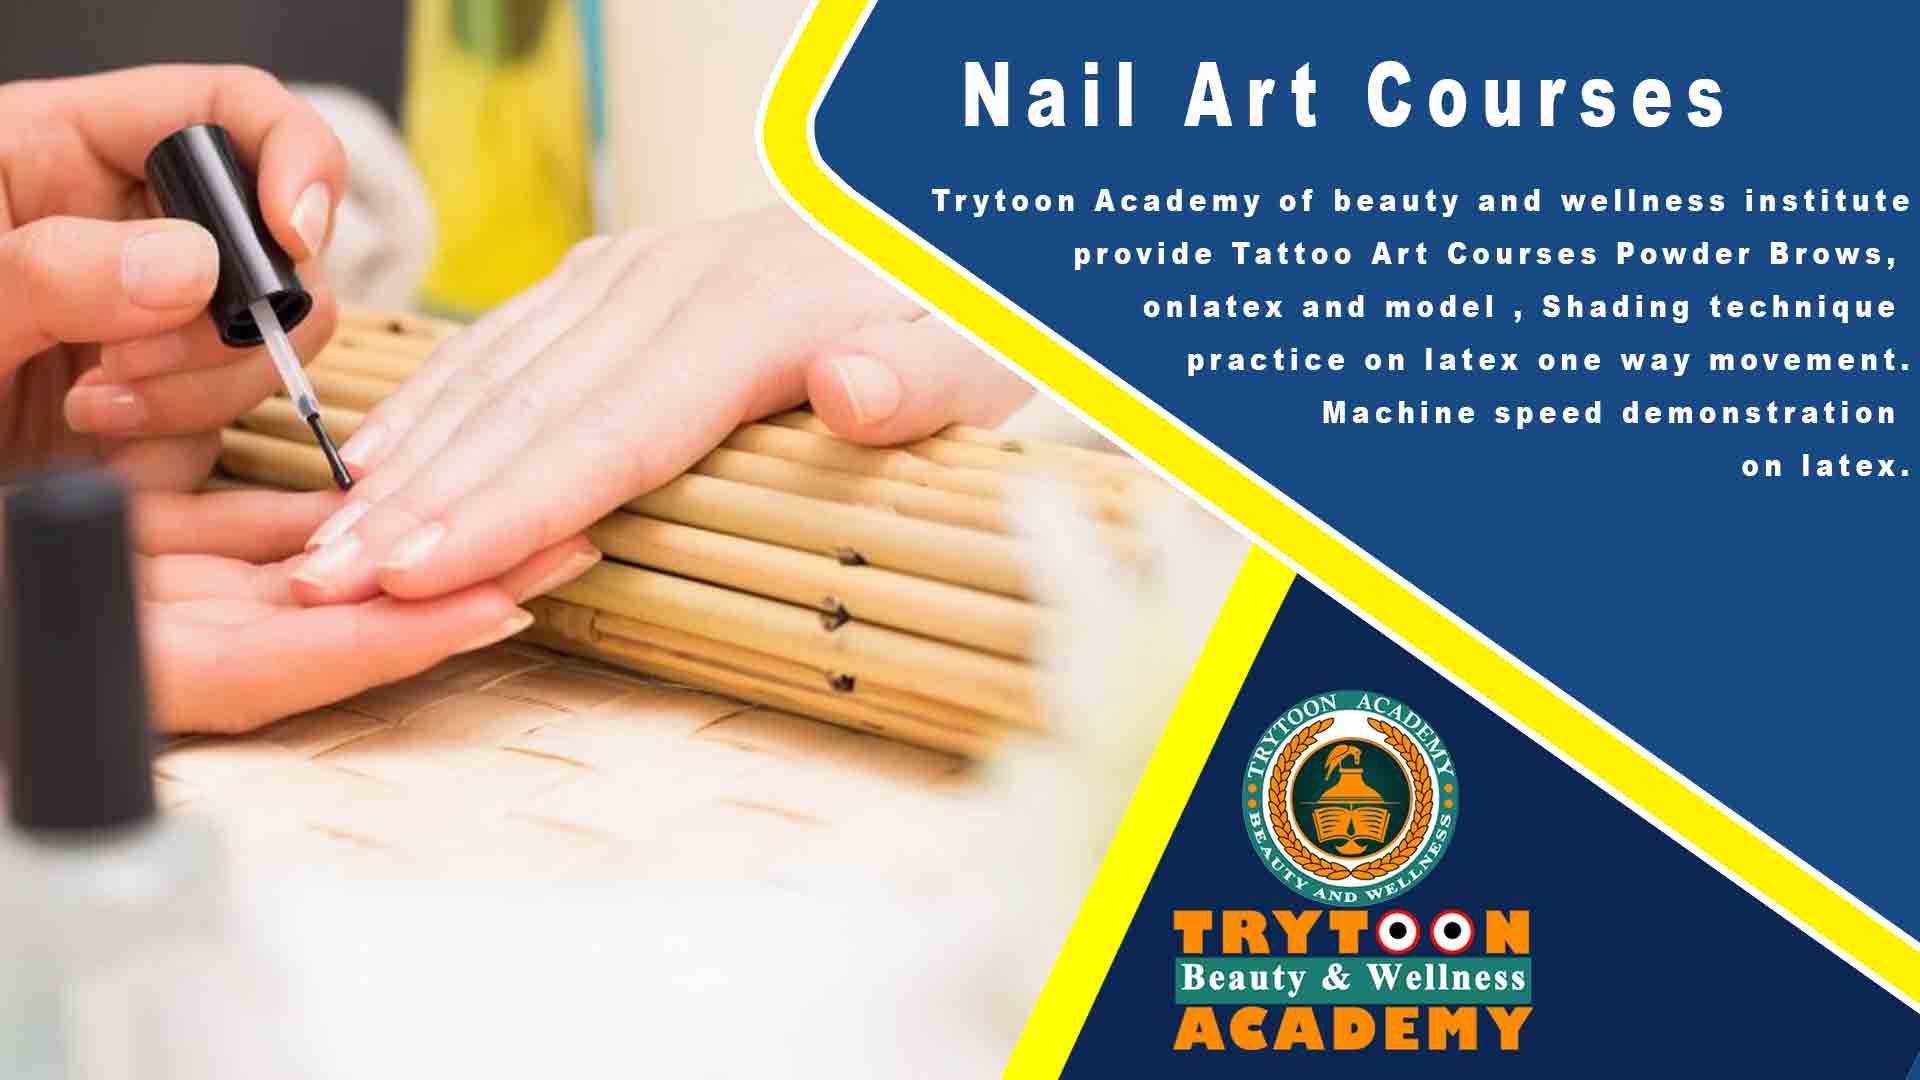 How much does the nail extension course cost?